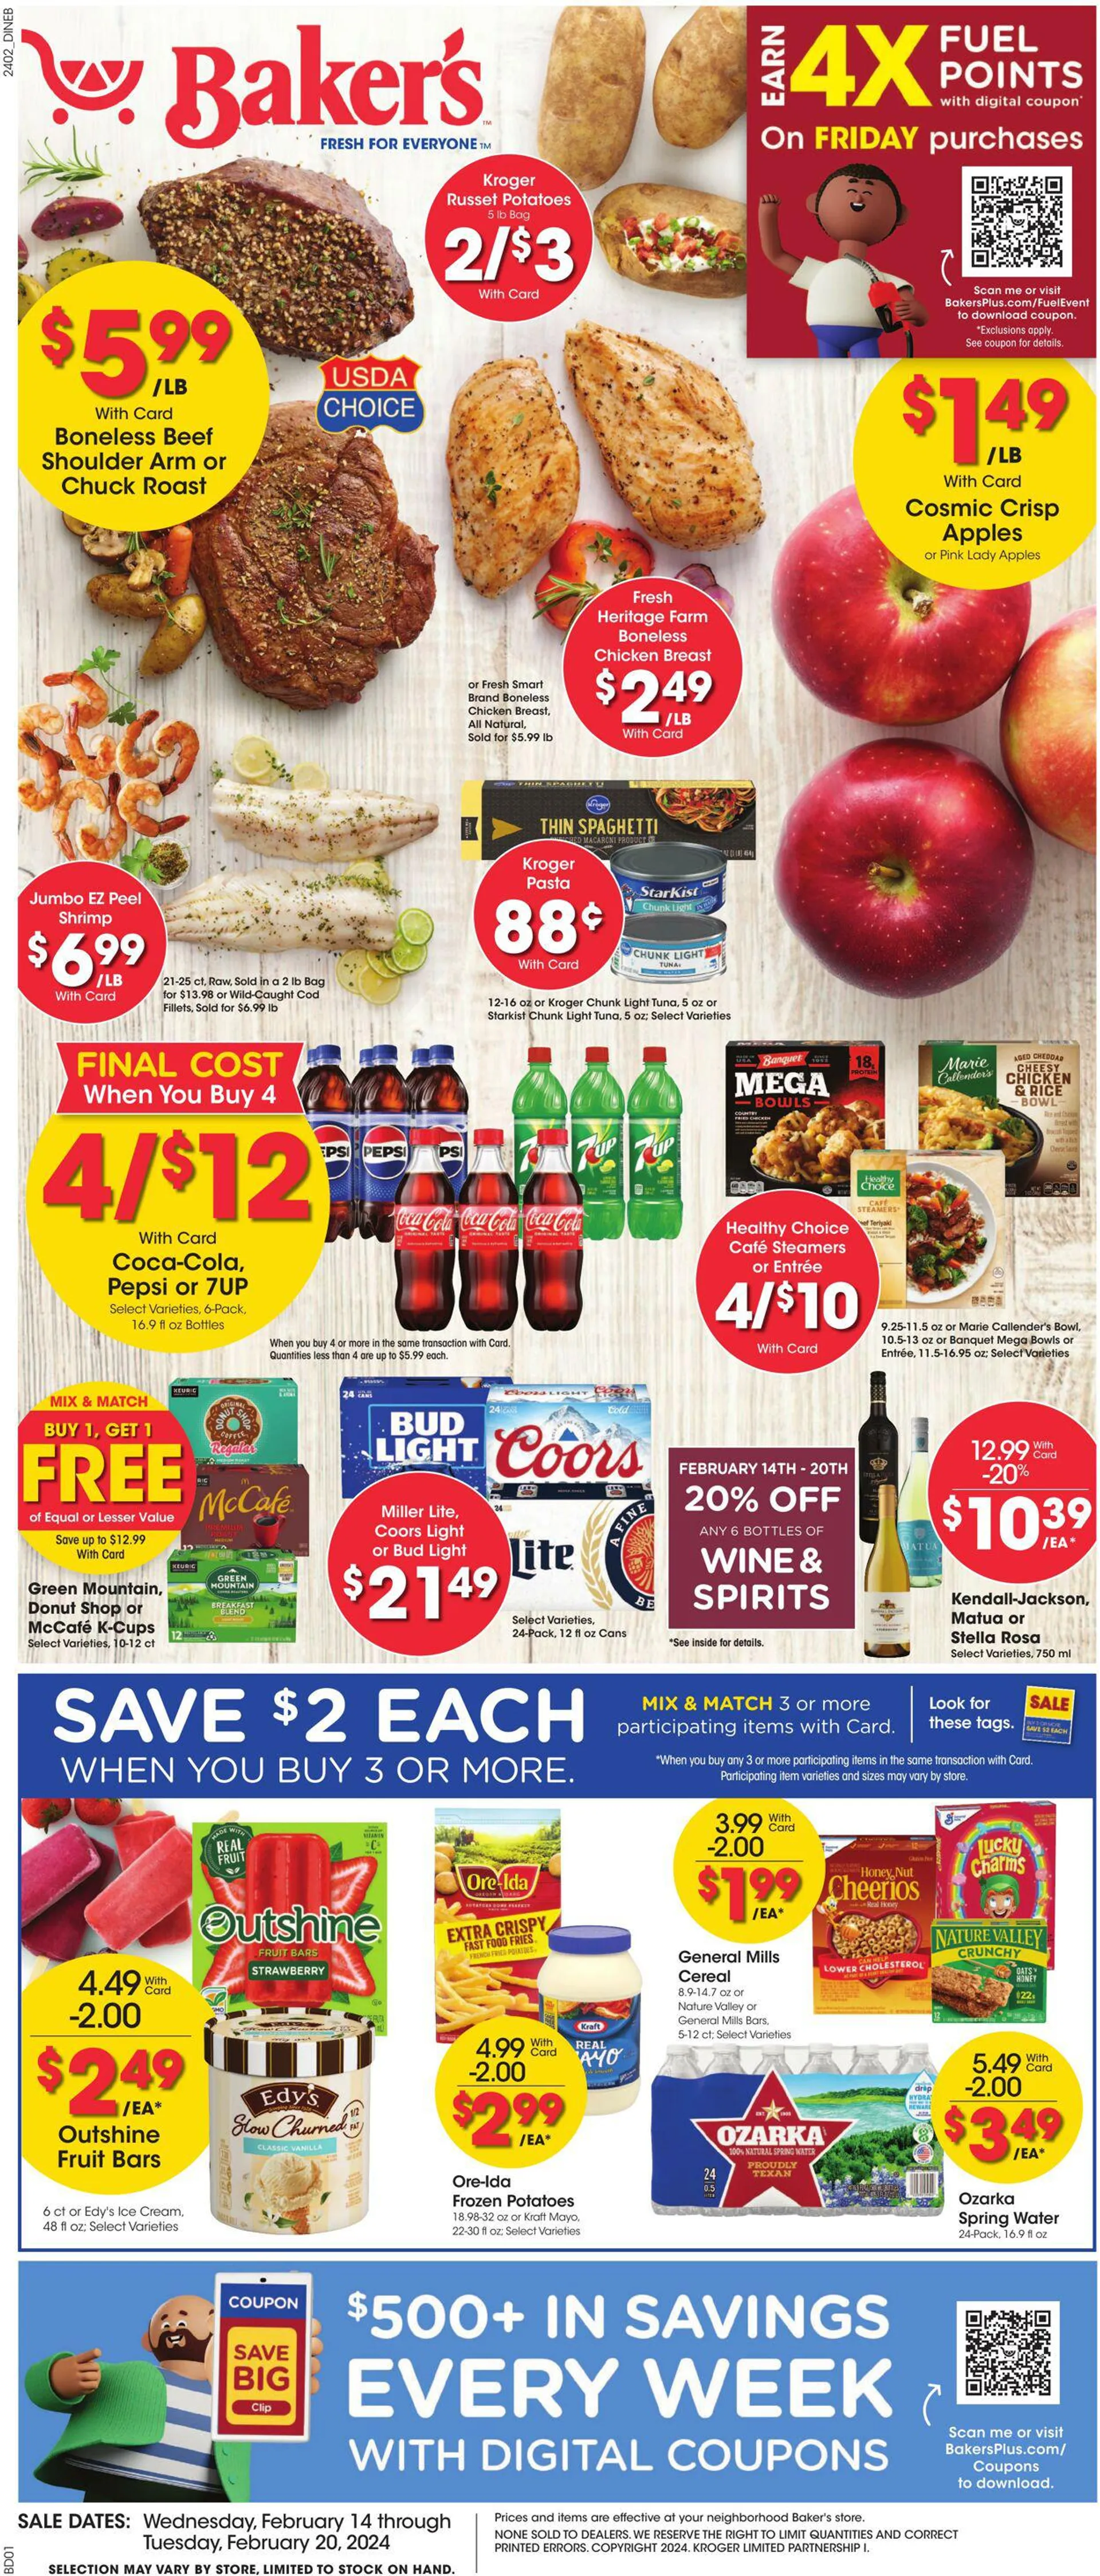 Weekly ad Baker's from February 14 to February 20 2024 - Page 1